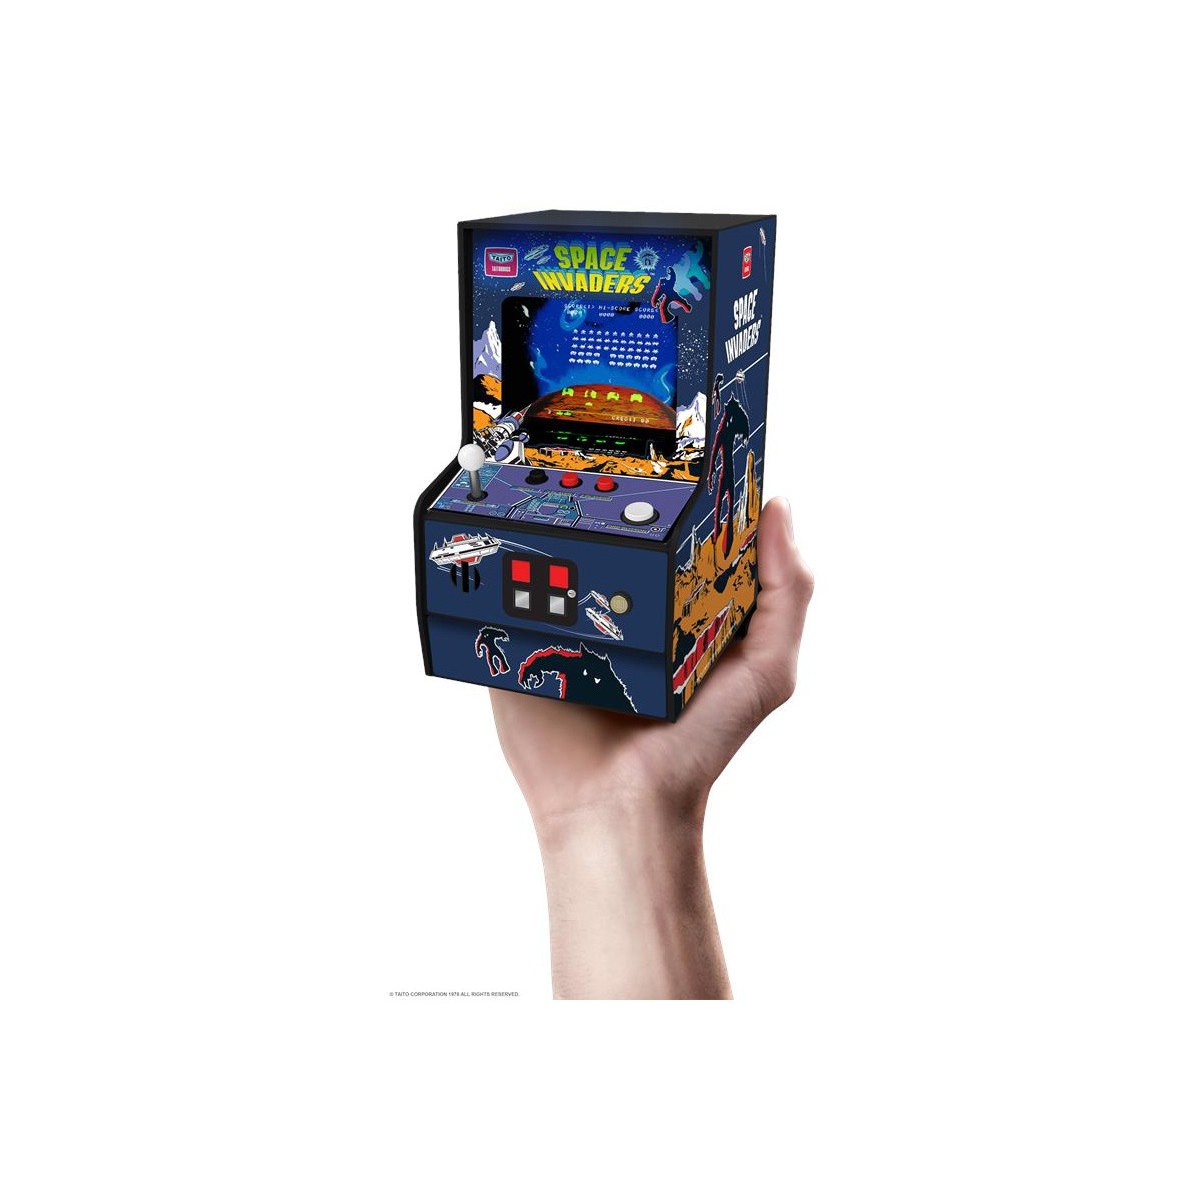 My Arcade - Micro Player Space Invaders